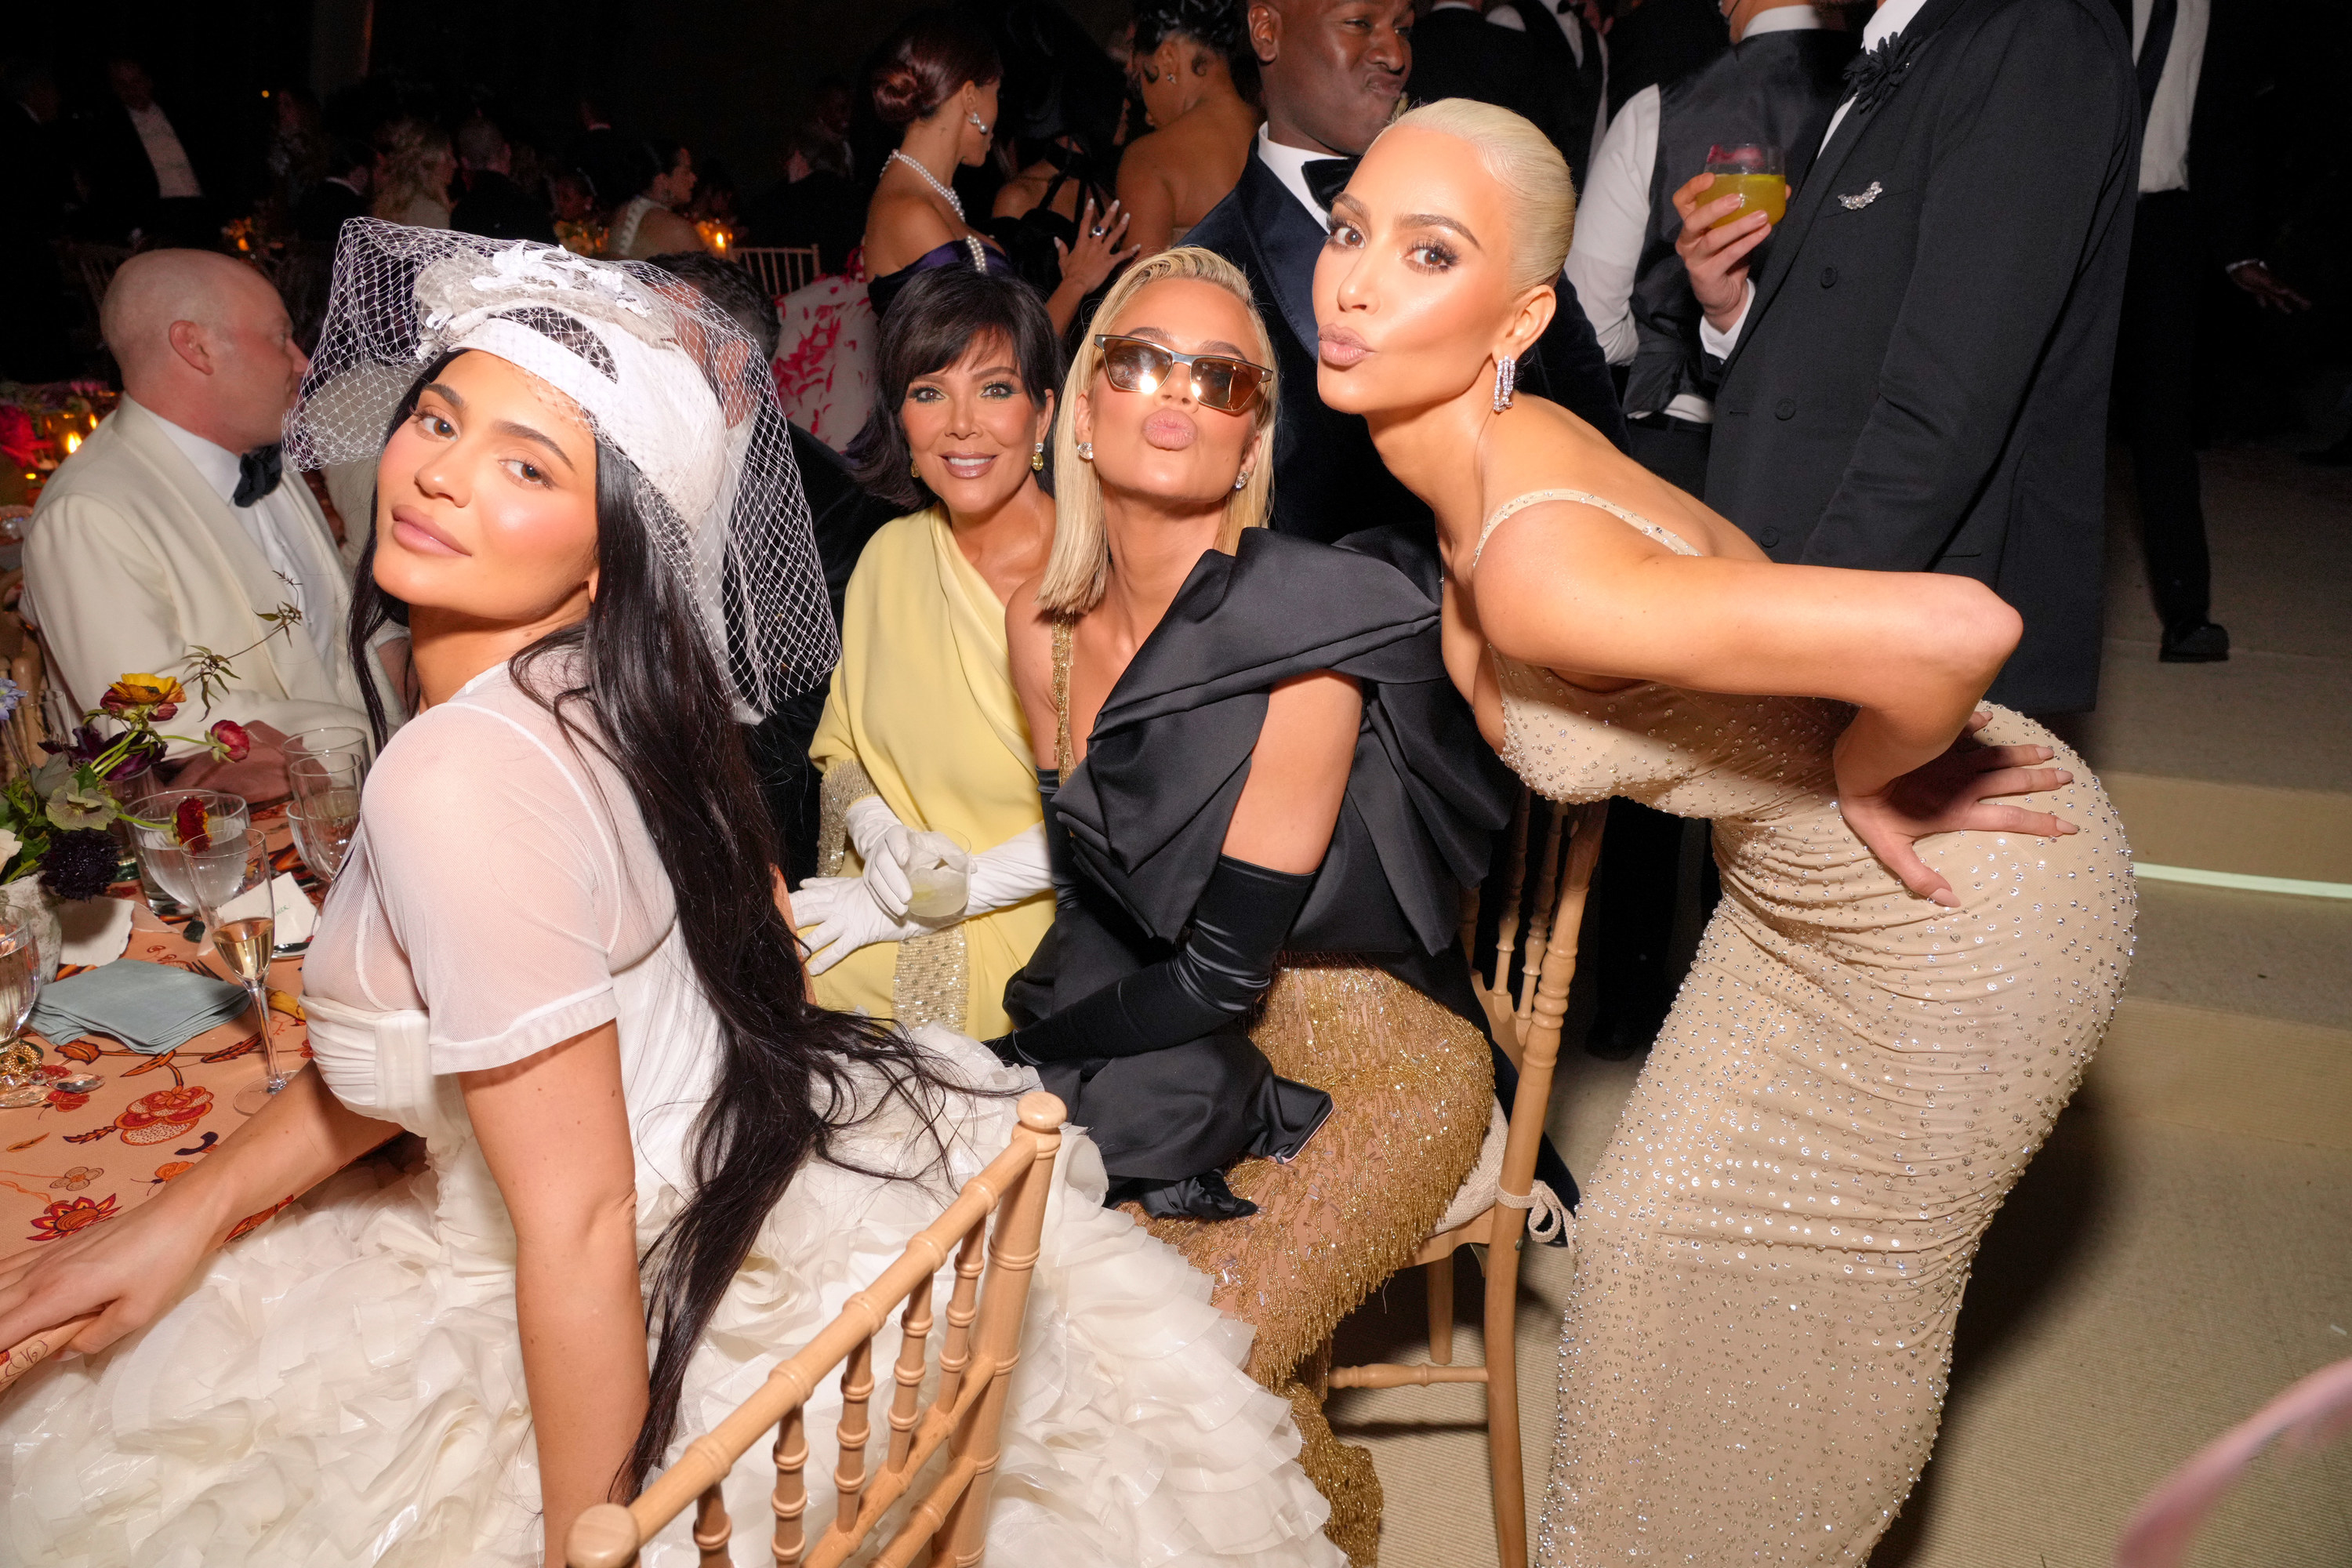 The Kardashians and Jenners at the Met Gala